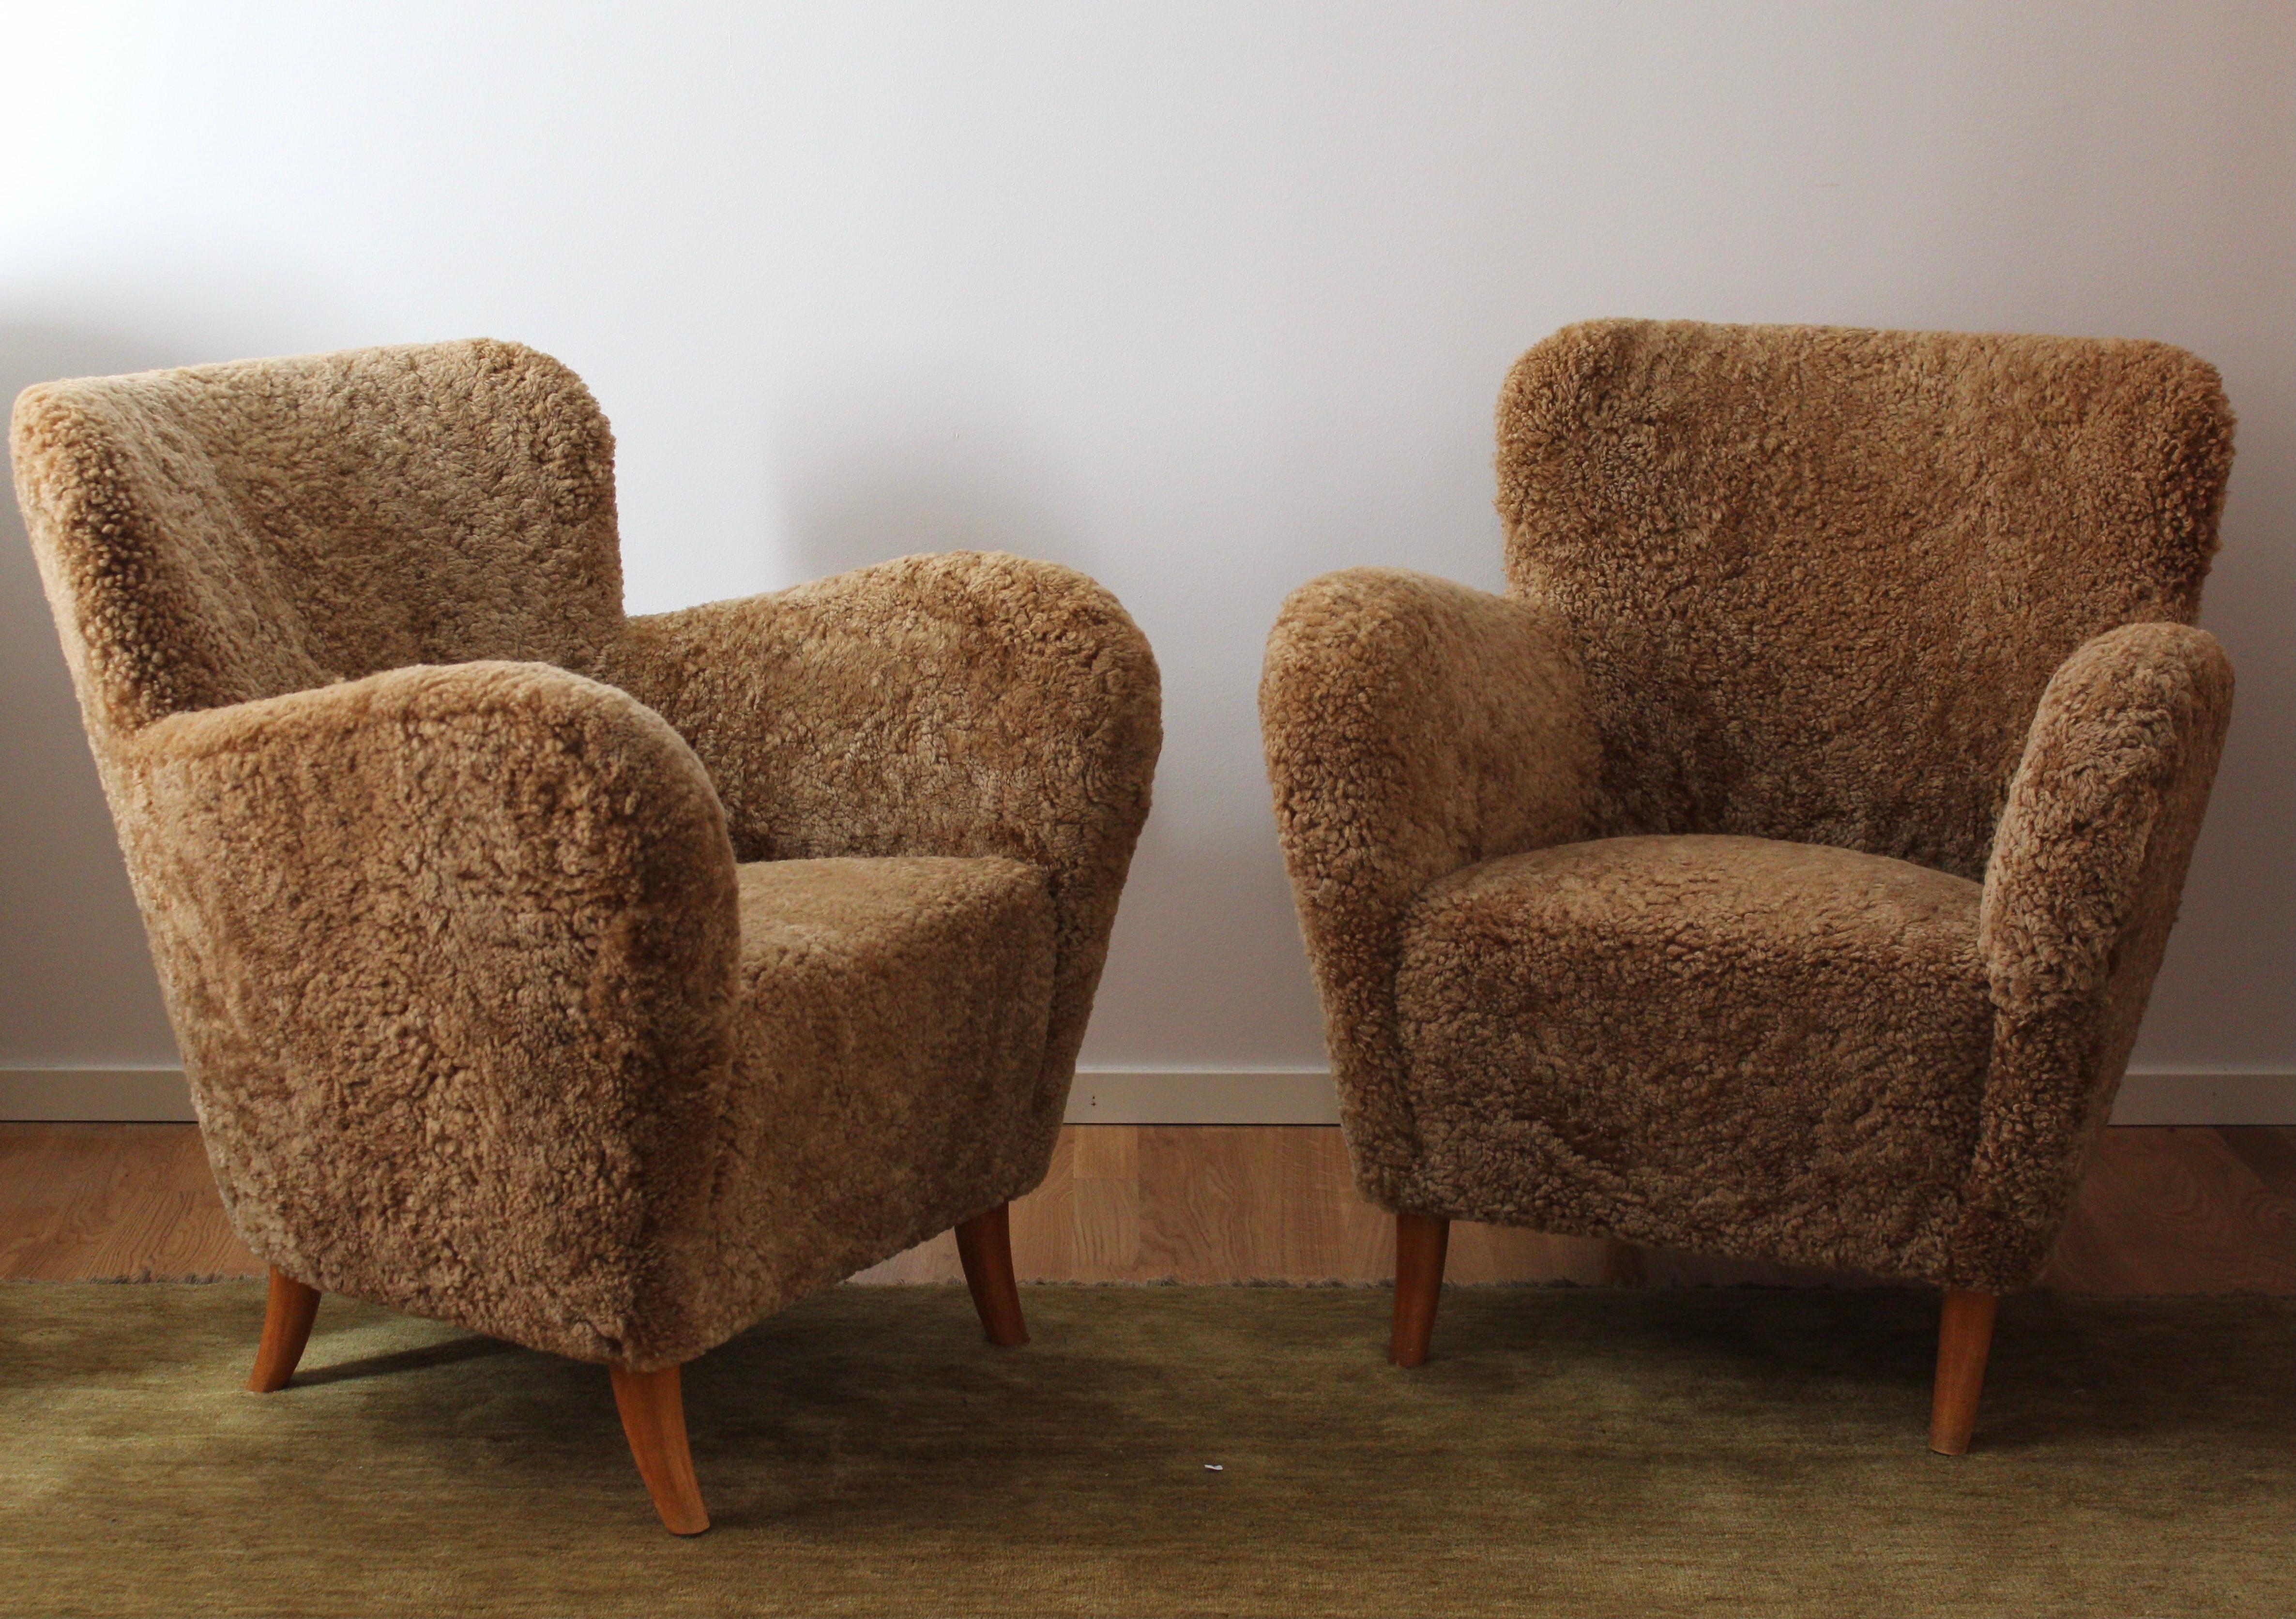 A pair of organic modernist lounge chairs. Designed and produced in Finland, 1940s. Reupholstered in brand new authentic shearling upholstery. 

Similar in style to works by designers such as Flemming Lassen, Gio Ponti, Vladimir Kagan, Philip